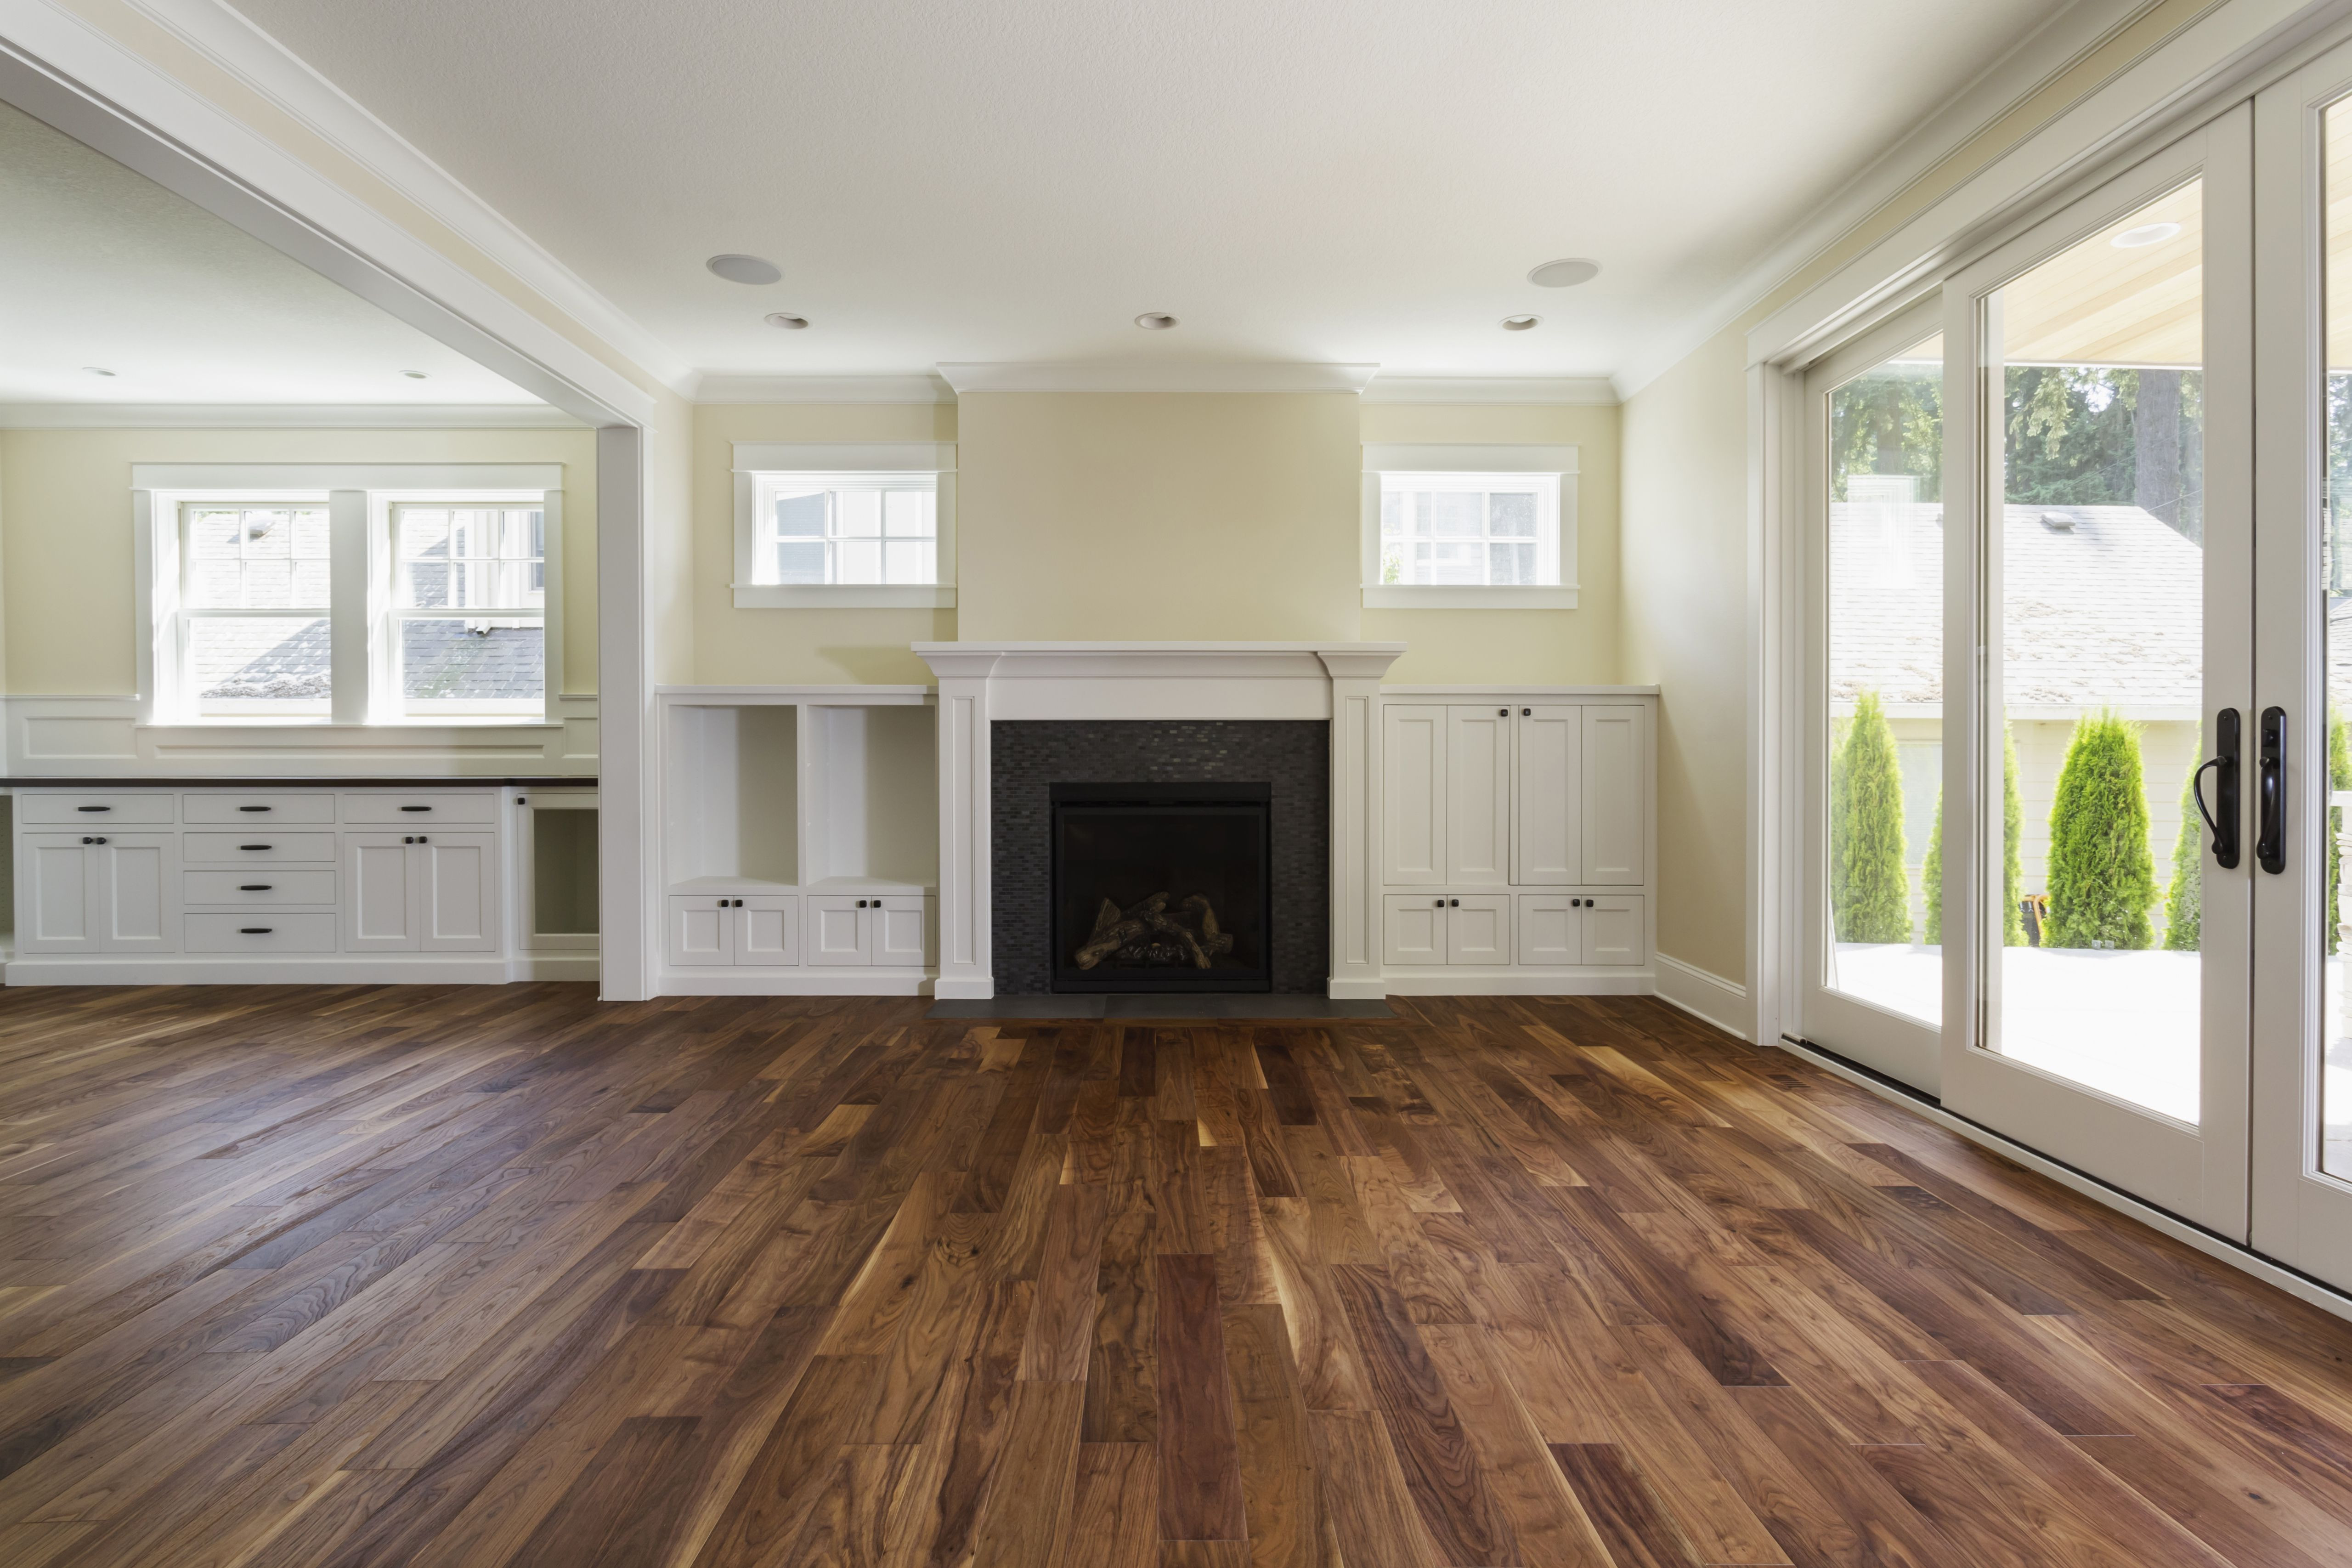 3 1 4 white oak hardwood flooring of the pros and cons of prefinished hardwood flooring regarding fireplace and built in shelves in living room 482143011 57bef8e33df78cc16e035397